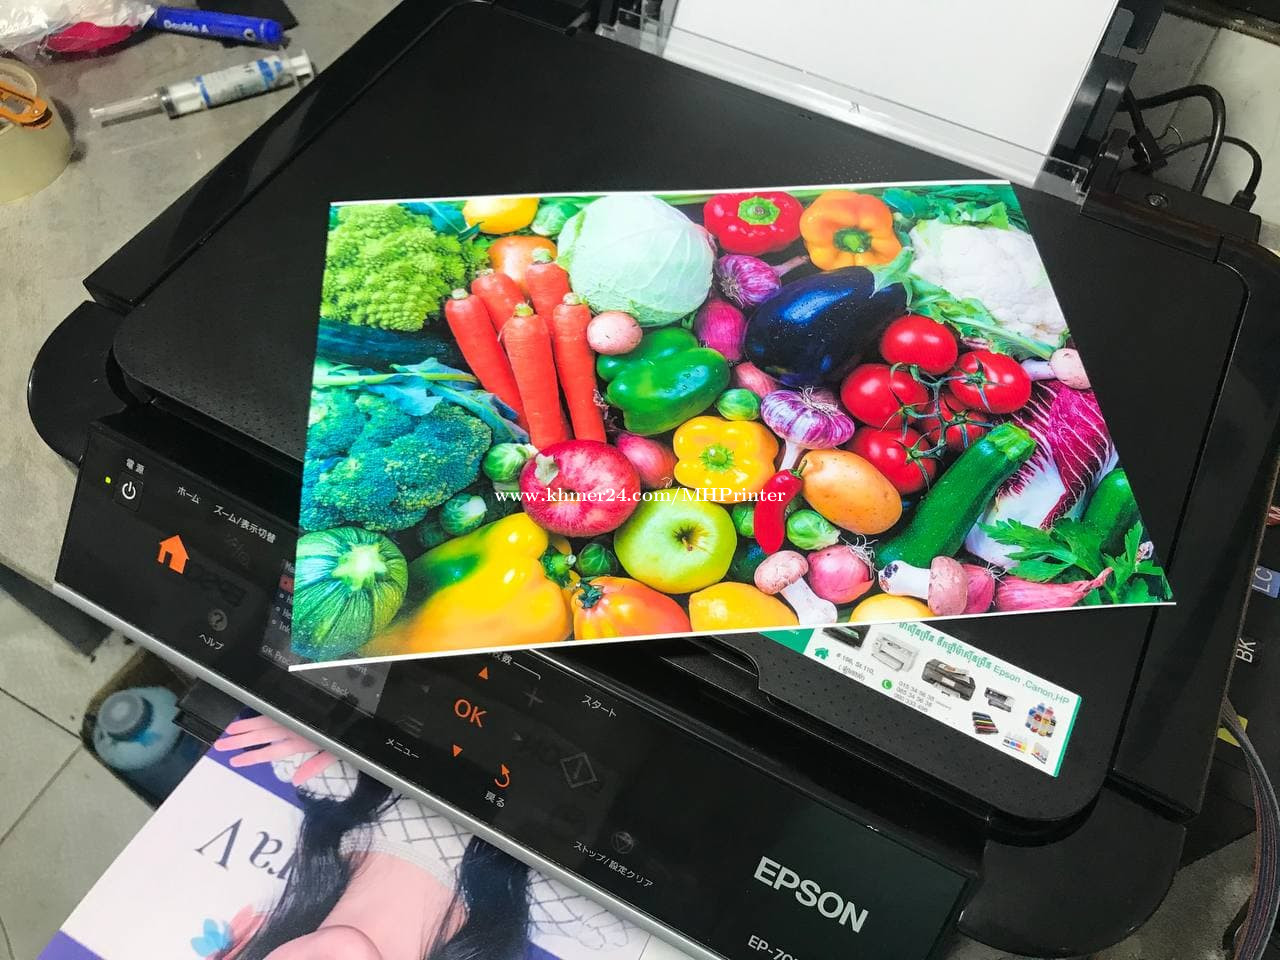 EPSON EP-703A From japn Price $170.00 in Phnom Penh, Cambodia - MH